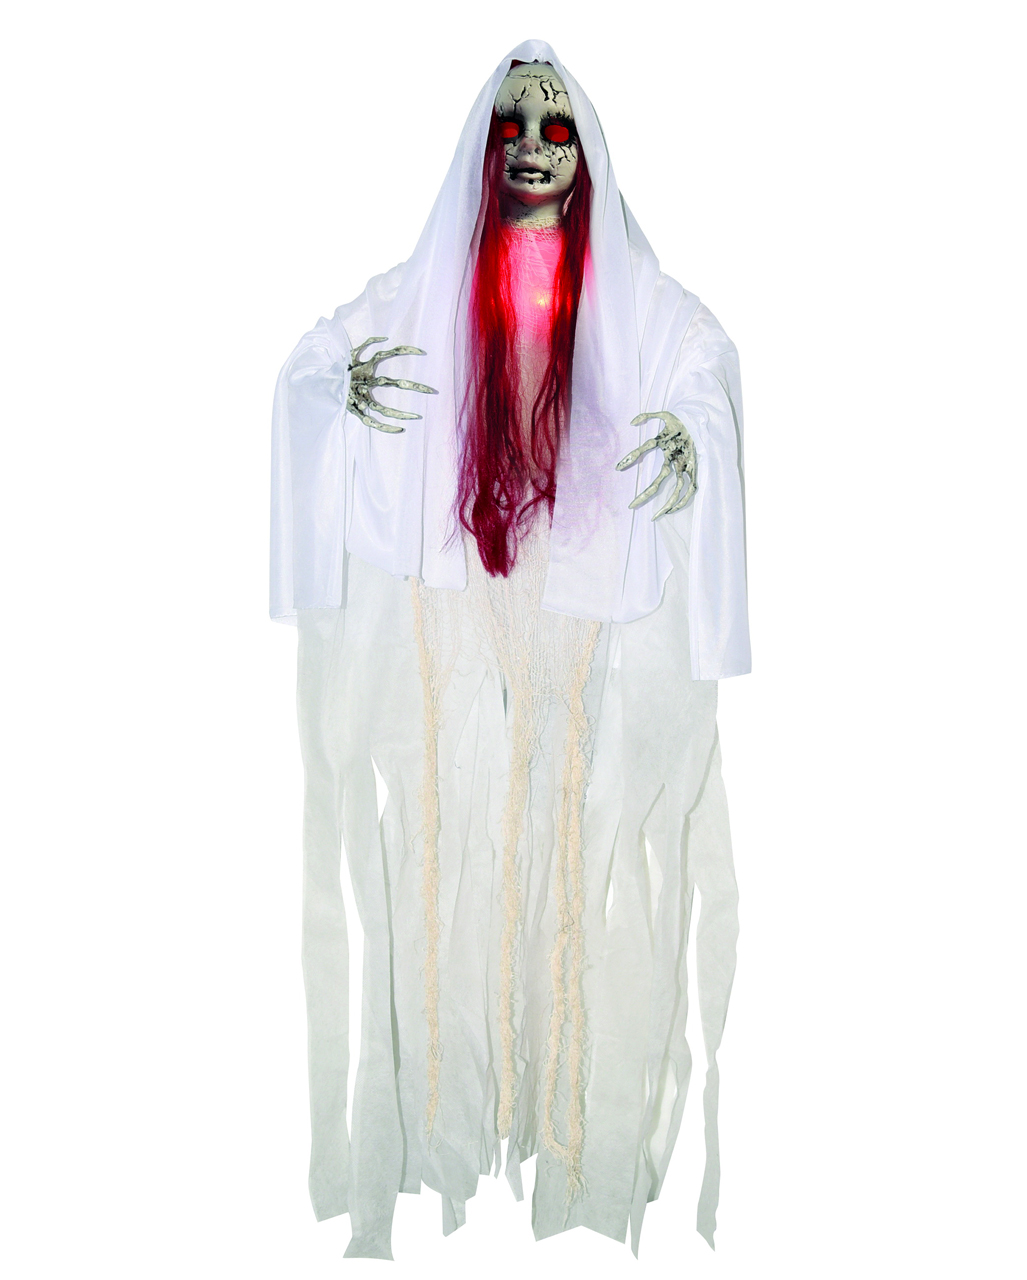 91cm Hanging Ghost Doll Girl Decoration Halloween Fancy Dress Party Prop Scary 